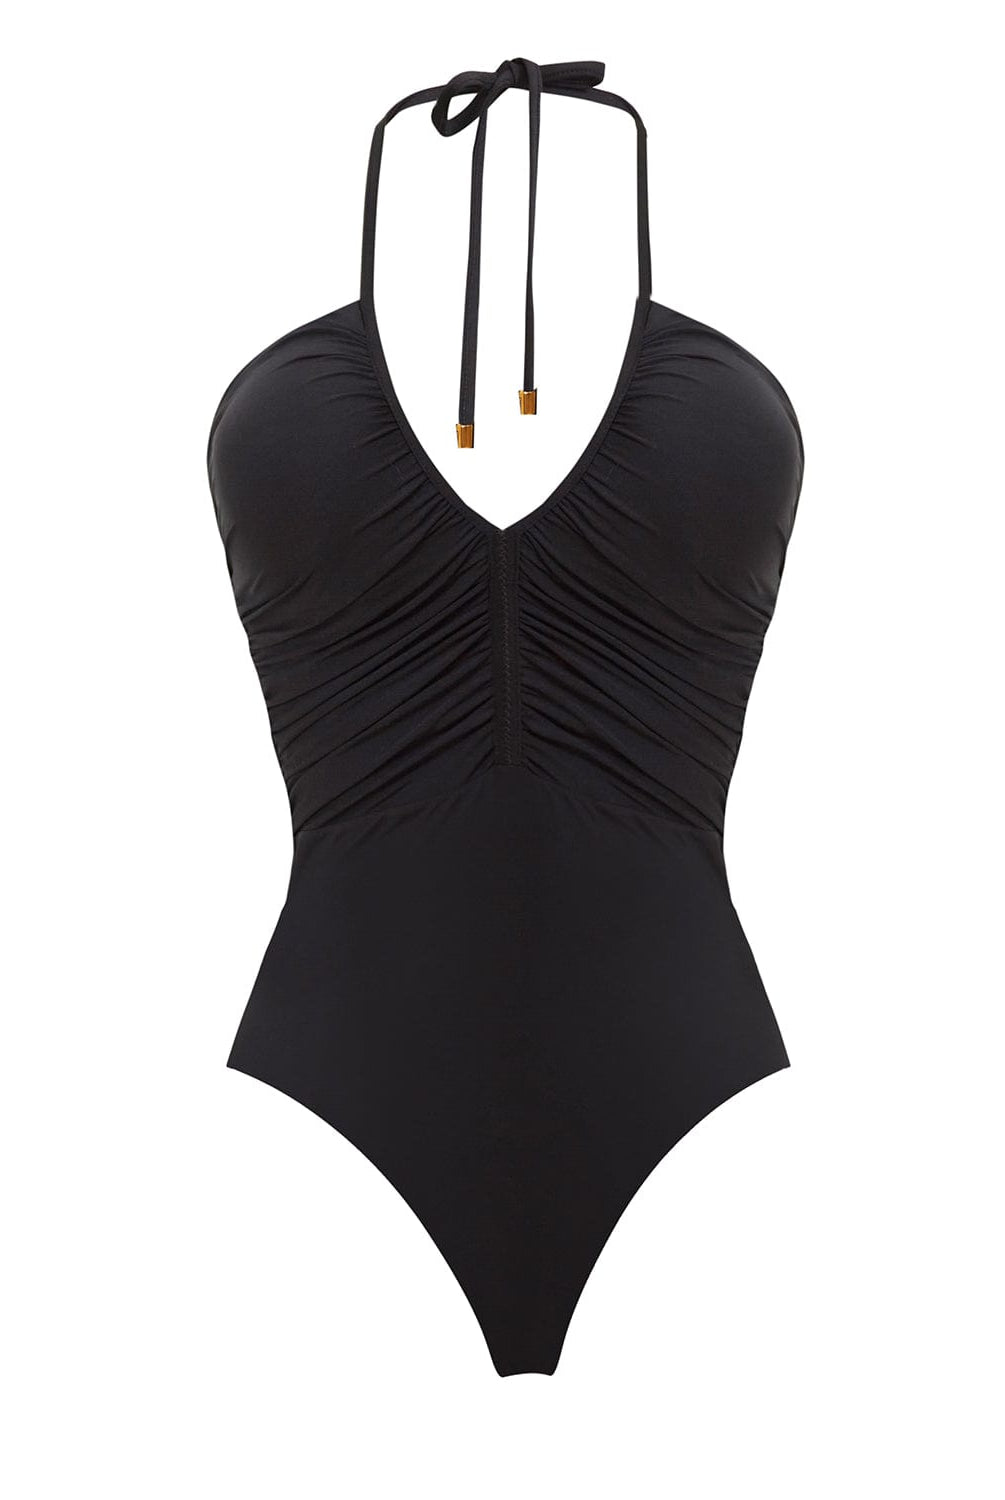 A black one piece swimsuit. Featured against a white wall background.